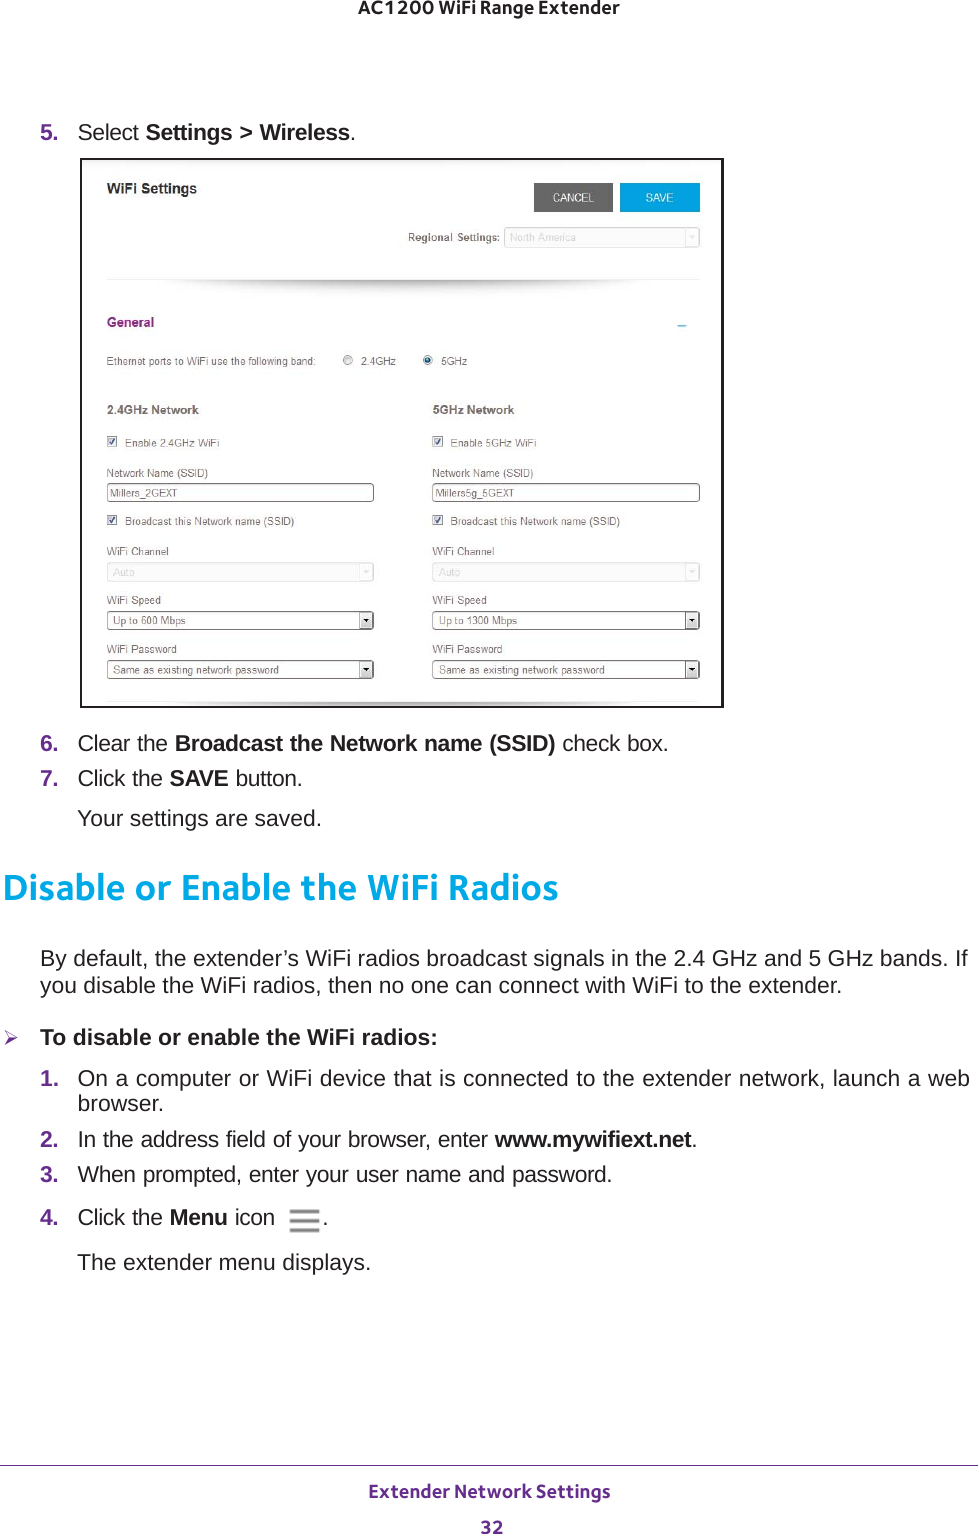 Extender Network Settings 32AC1200 WiFi Range Extender 5.  Select Settings &gt; Wireless.6.  Clear the Broadcast the Network name (SSID) check box.7.  Click the SAVE button.Your settings are saved.Disable or Enable the WiFi RadiosBy default, the extender’s WiFi radios broadcast signals in the 2.4 GHz and 5 GHz bands. If you disable the WiFi radios, then no one can connect with WiFi to the extender. To disable or enable the WiFi radios:1.  On a computer or WiFi device that is connected to the extender network, launch a web browser. 2.  In the address field of your browser, enter www.mywifiext.net. 3.  When prompted, enter your user name and password.4.  Click the Menu icon  .The extender menu displays.